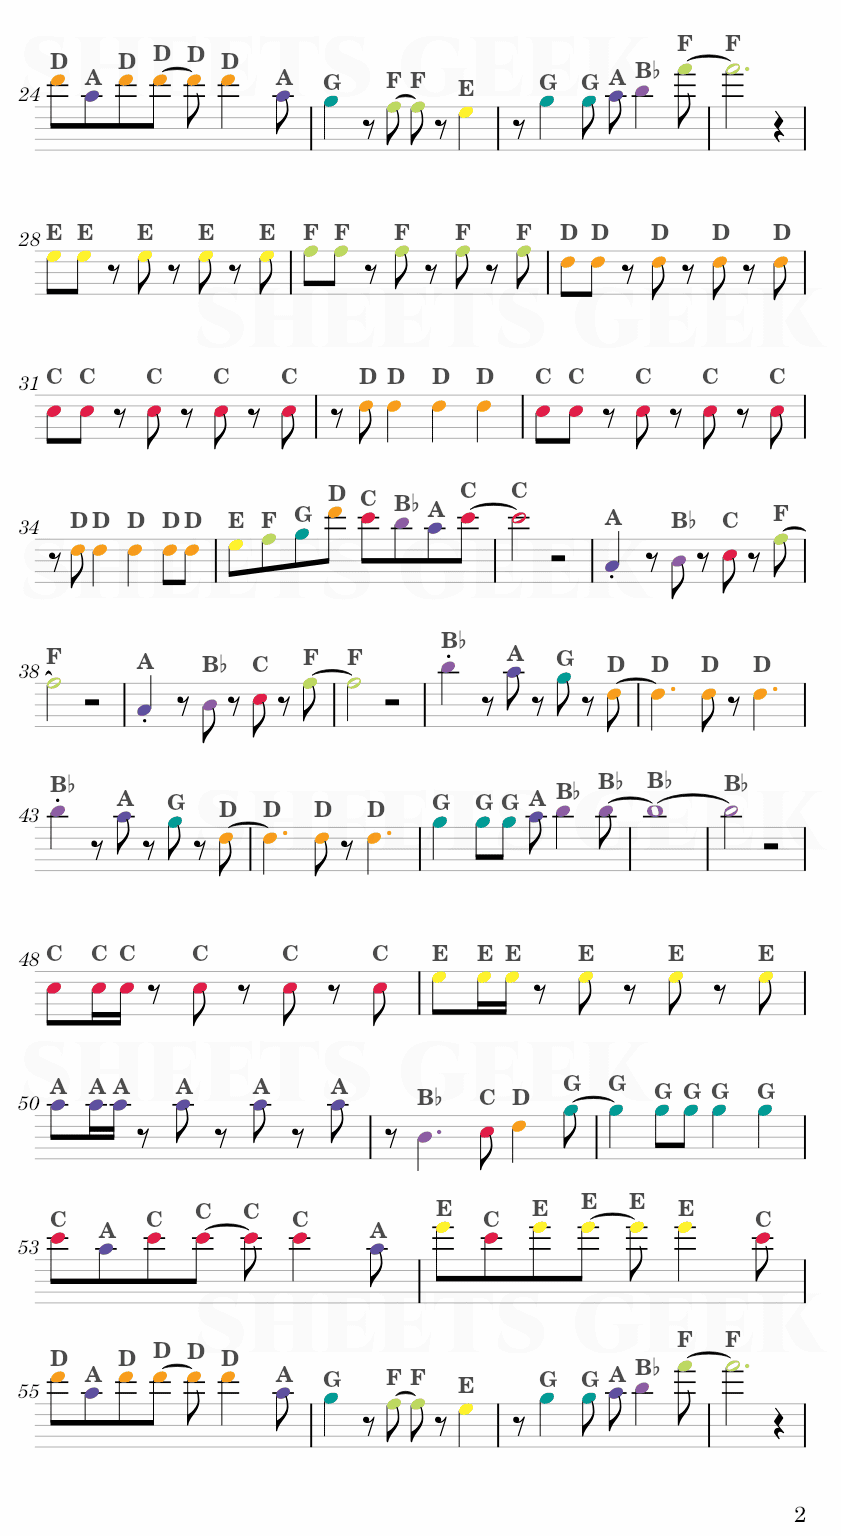 Don't Stop Me Now - Queen Easy Sheet Music Free for piano, keyboard, flute, violin, sax, cello page 2